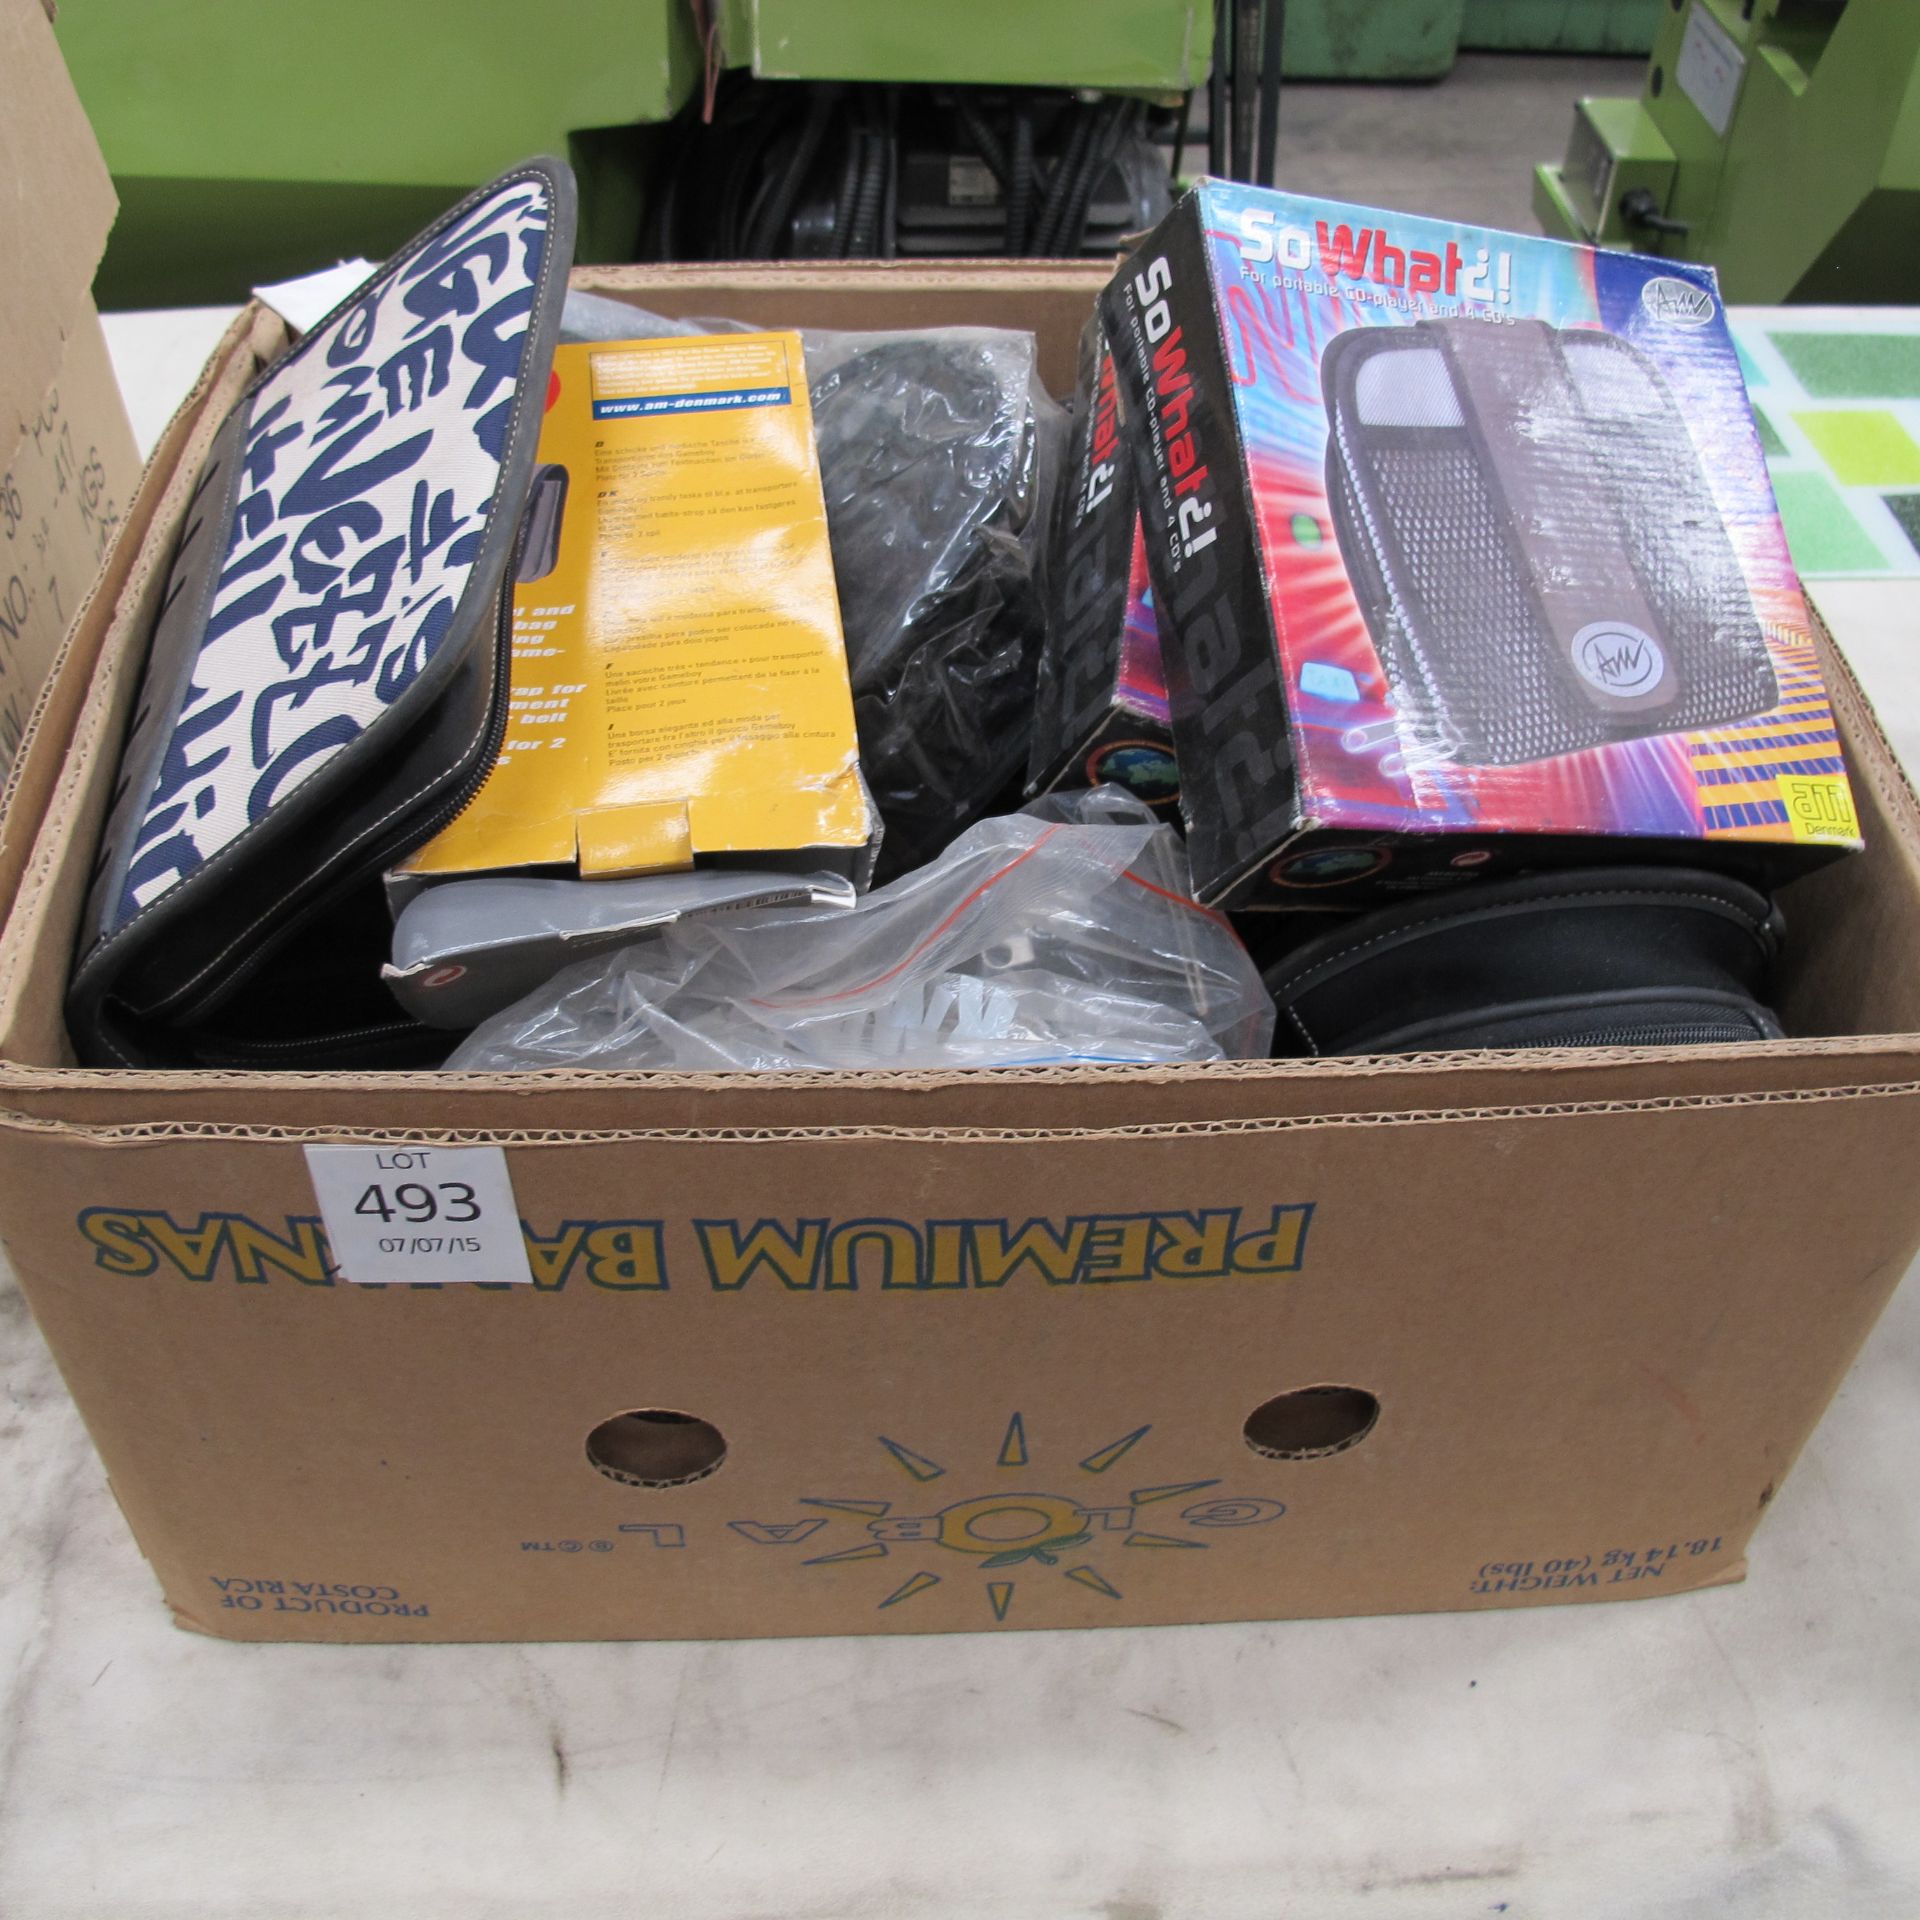 A box containing CD Bags and Cases etc.